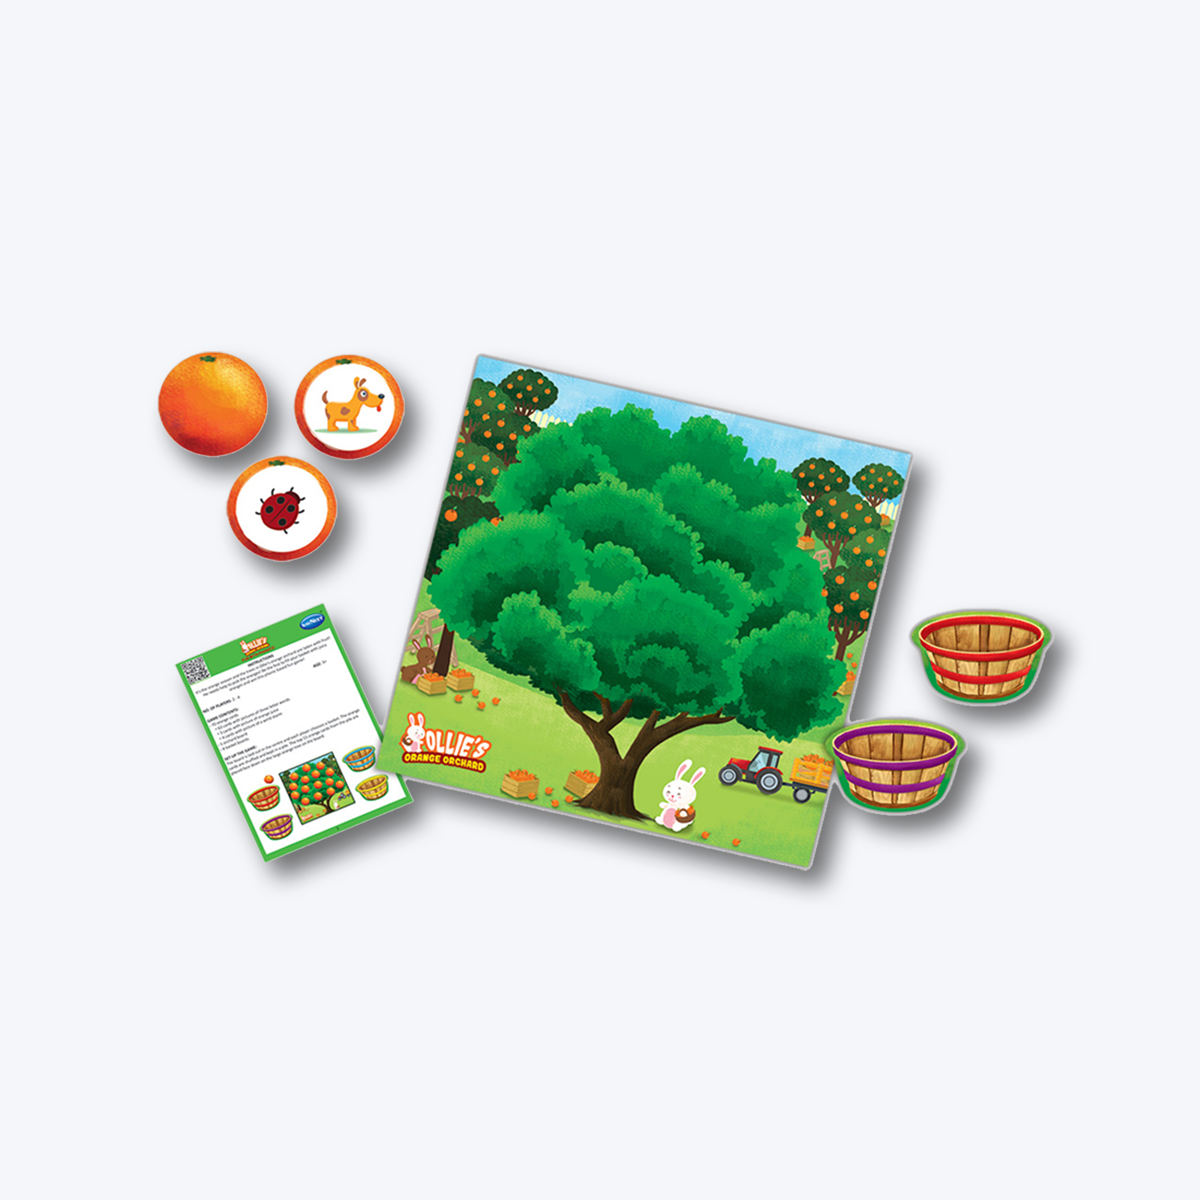 Navneet Ollie’s Orange Orchard Board Games- Learn Phonics - Bestselling Spelling game- Practise 3 letter words - Educational game - Gift for Age 3 & up - Family fun